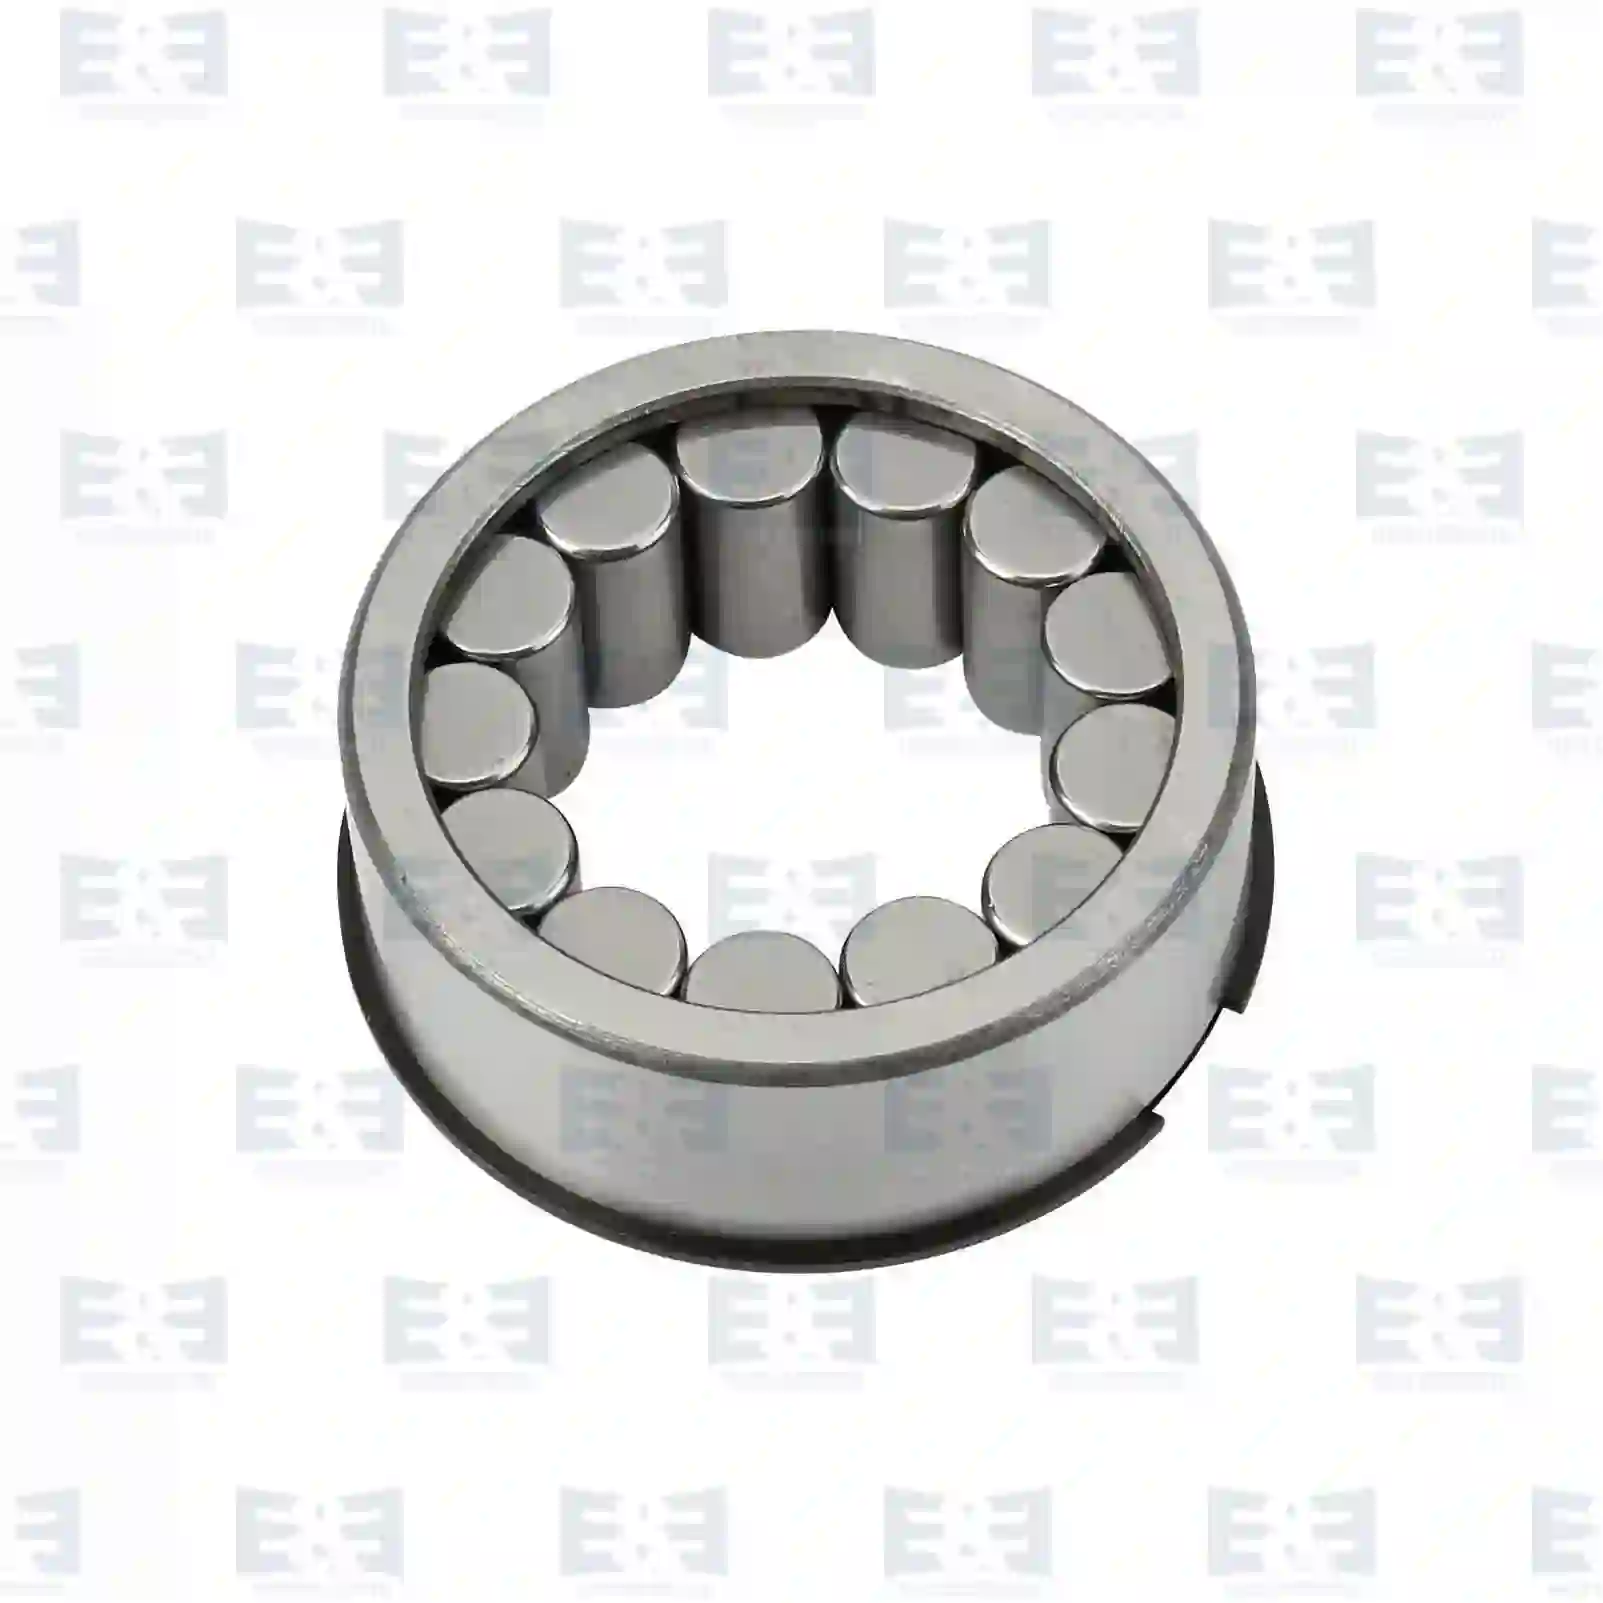  Cylinder roller bearing || E&E Truck Spare Parts | Truck Spare Parts, Auotomotive Spare Parts